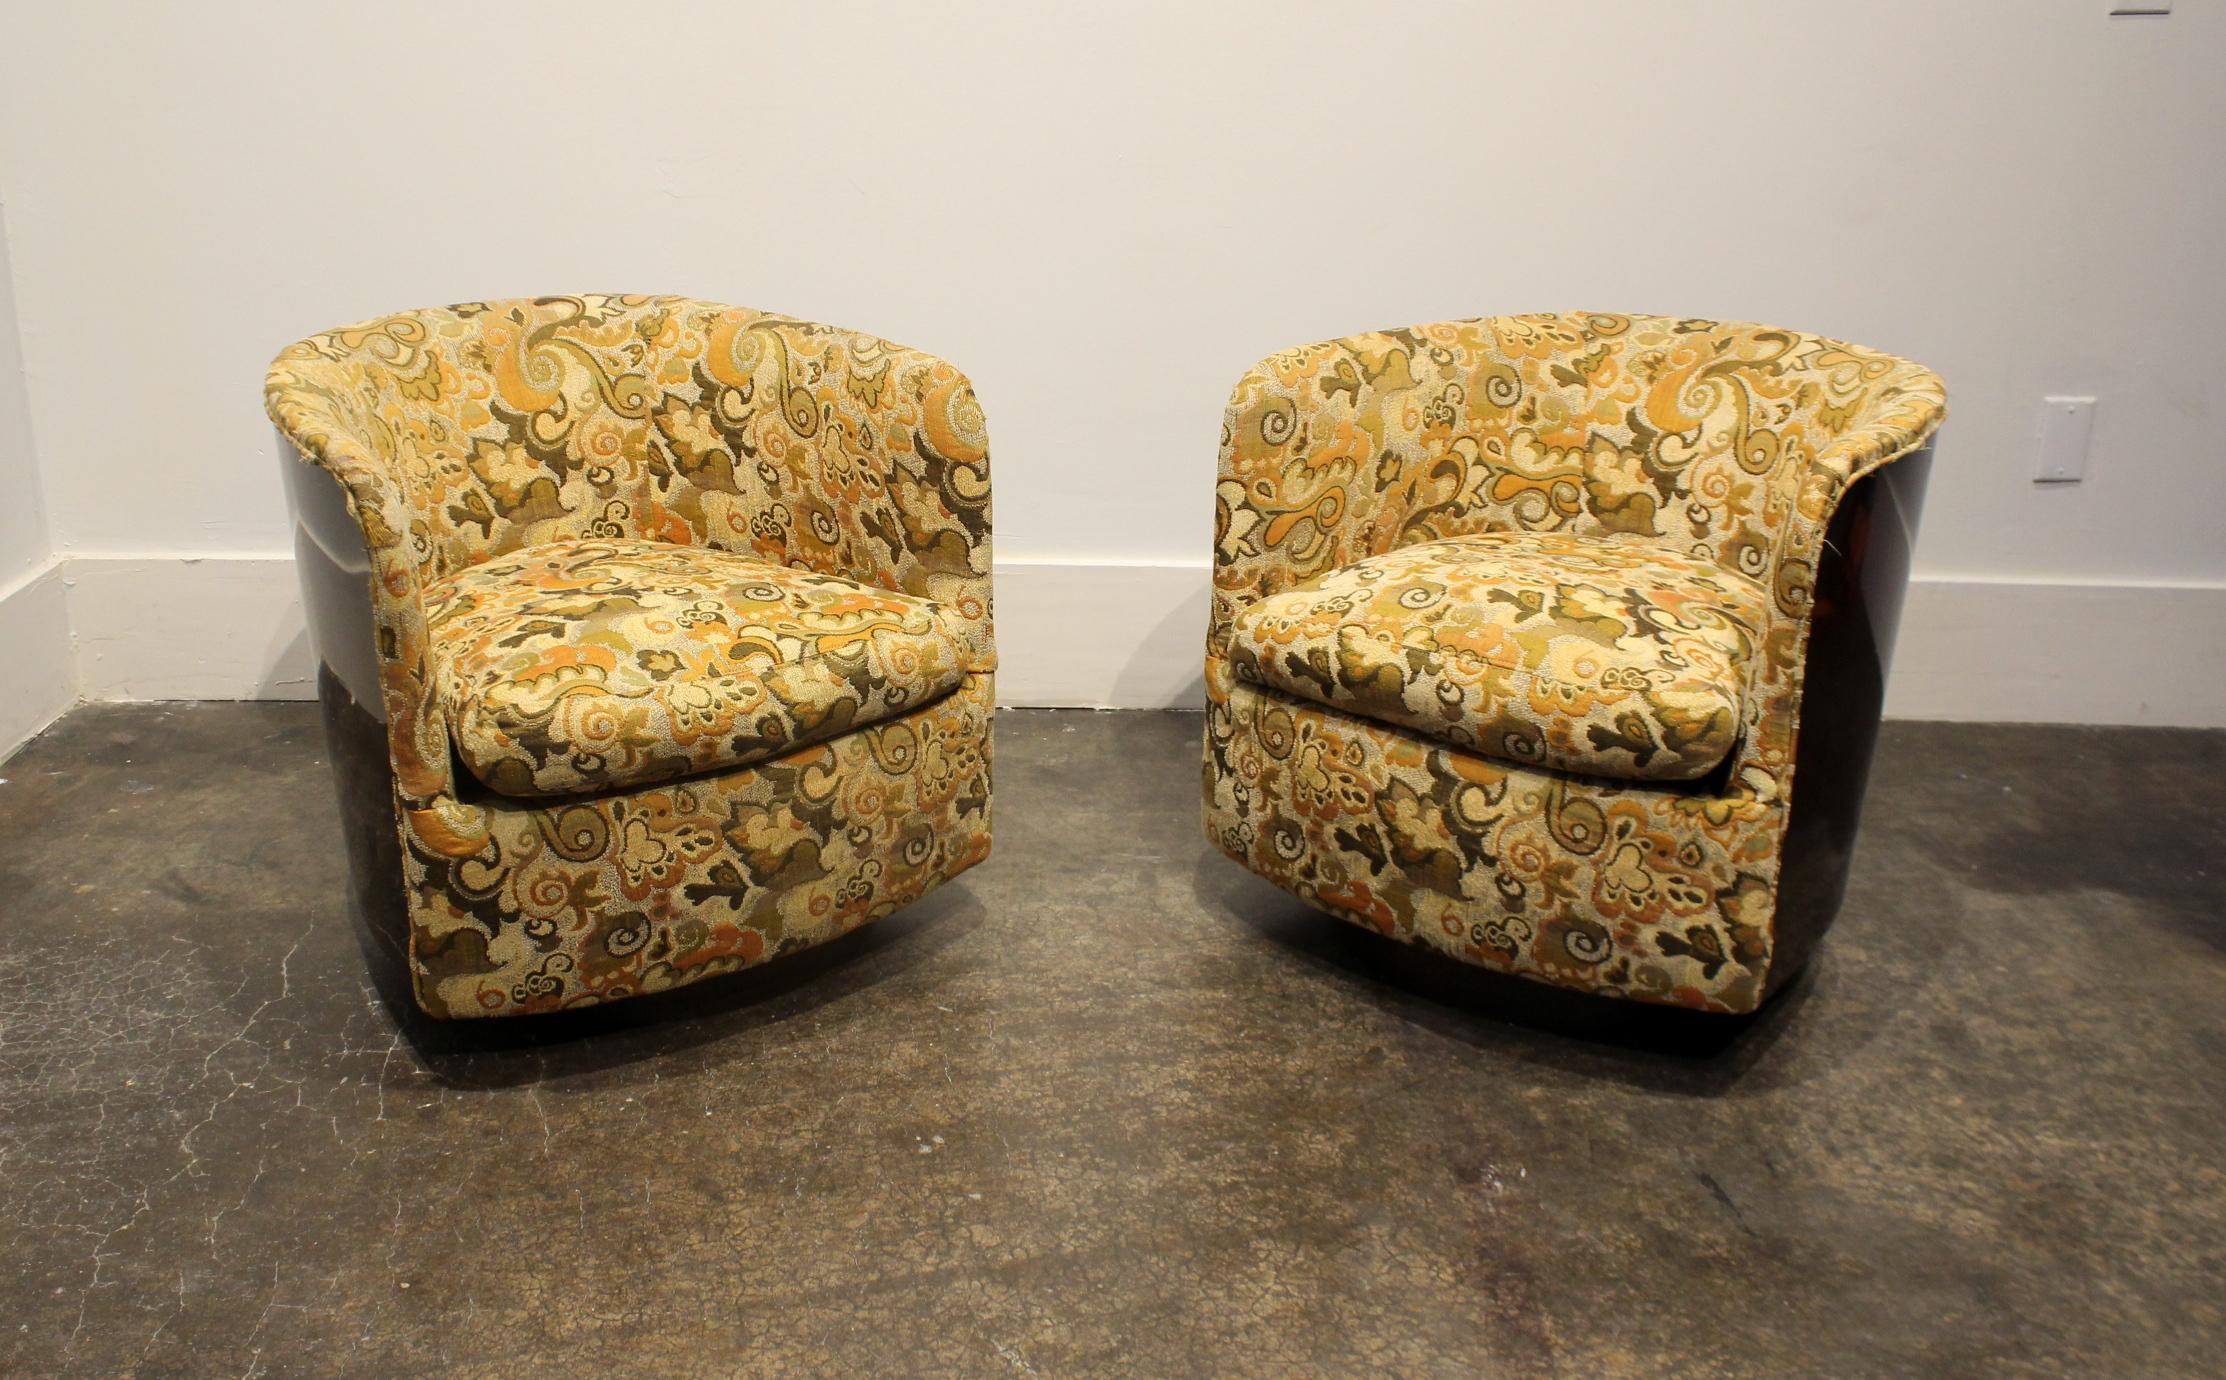 Pair of Milo Baughman for Thayer Coggin swivel tub chairs from 1972 with original tags and upholstery. Brown laminate wraps around sides and back. Floral upholstery in tan, yellow, orange, green and brown.
 
  